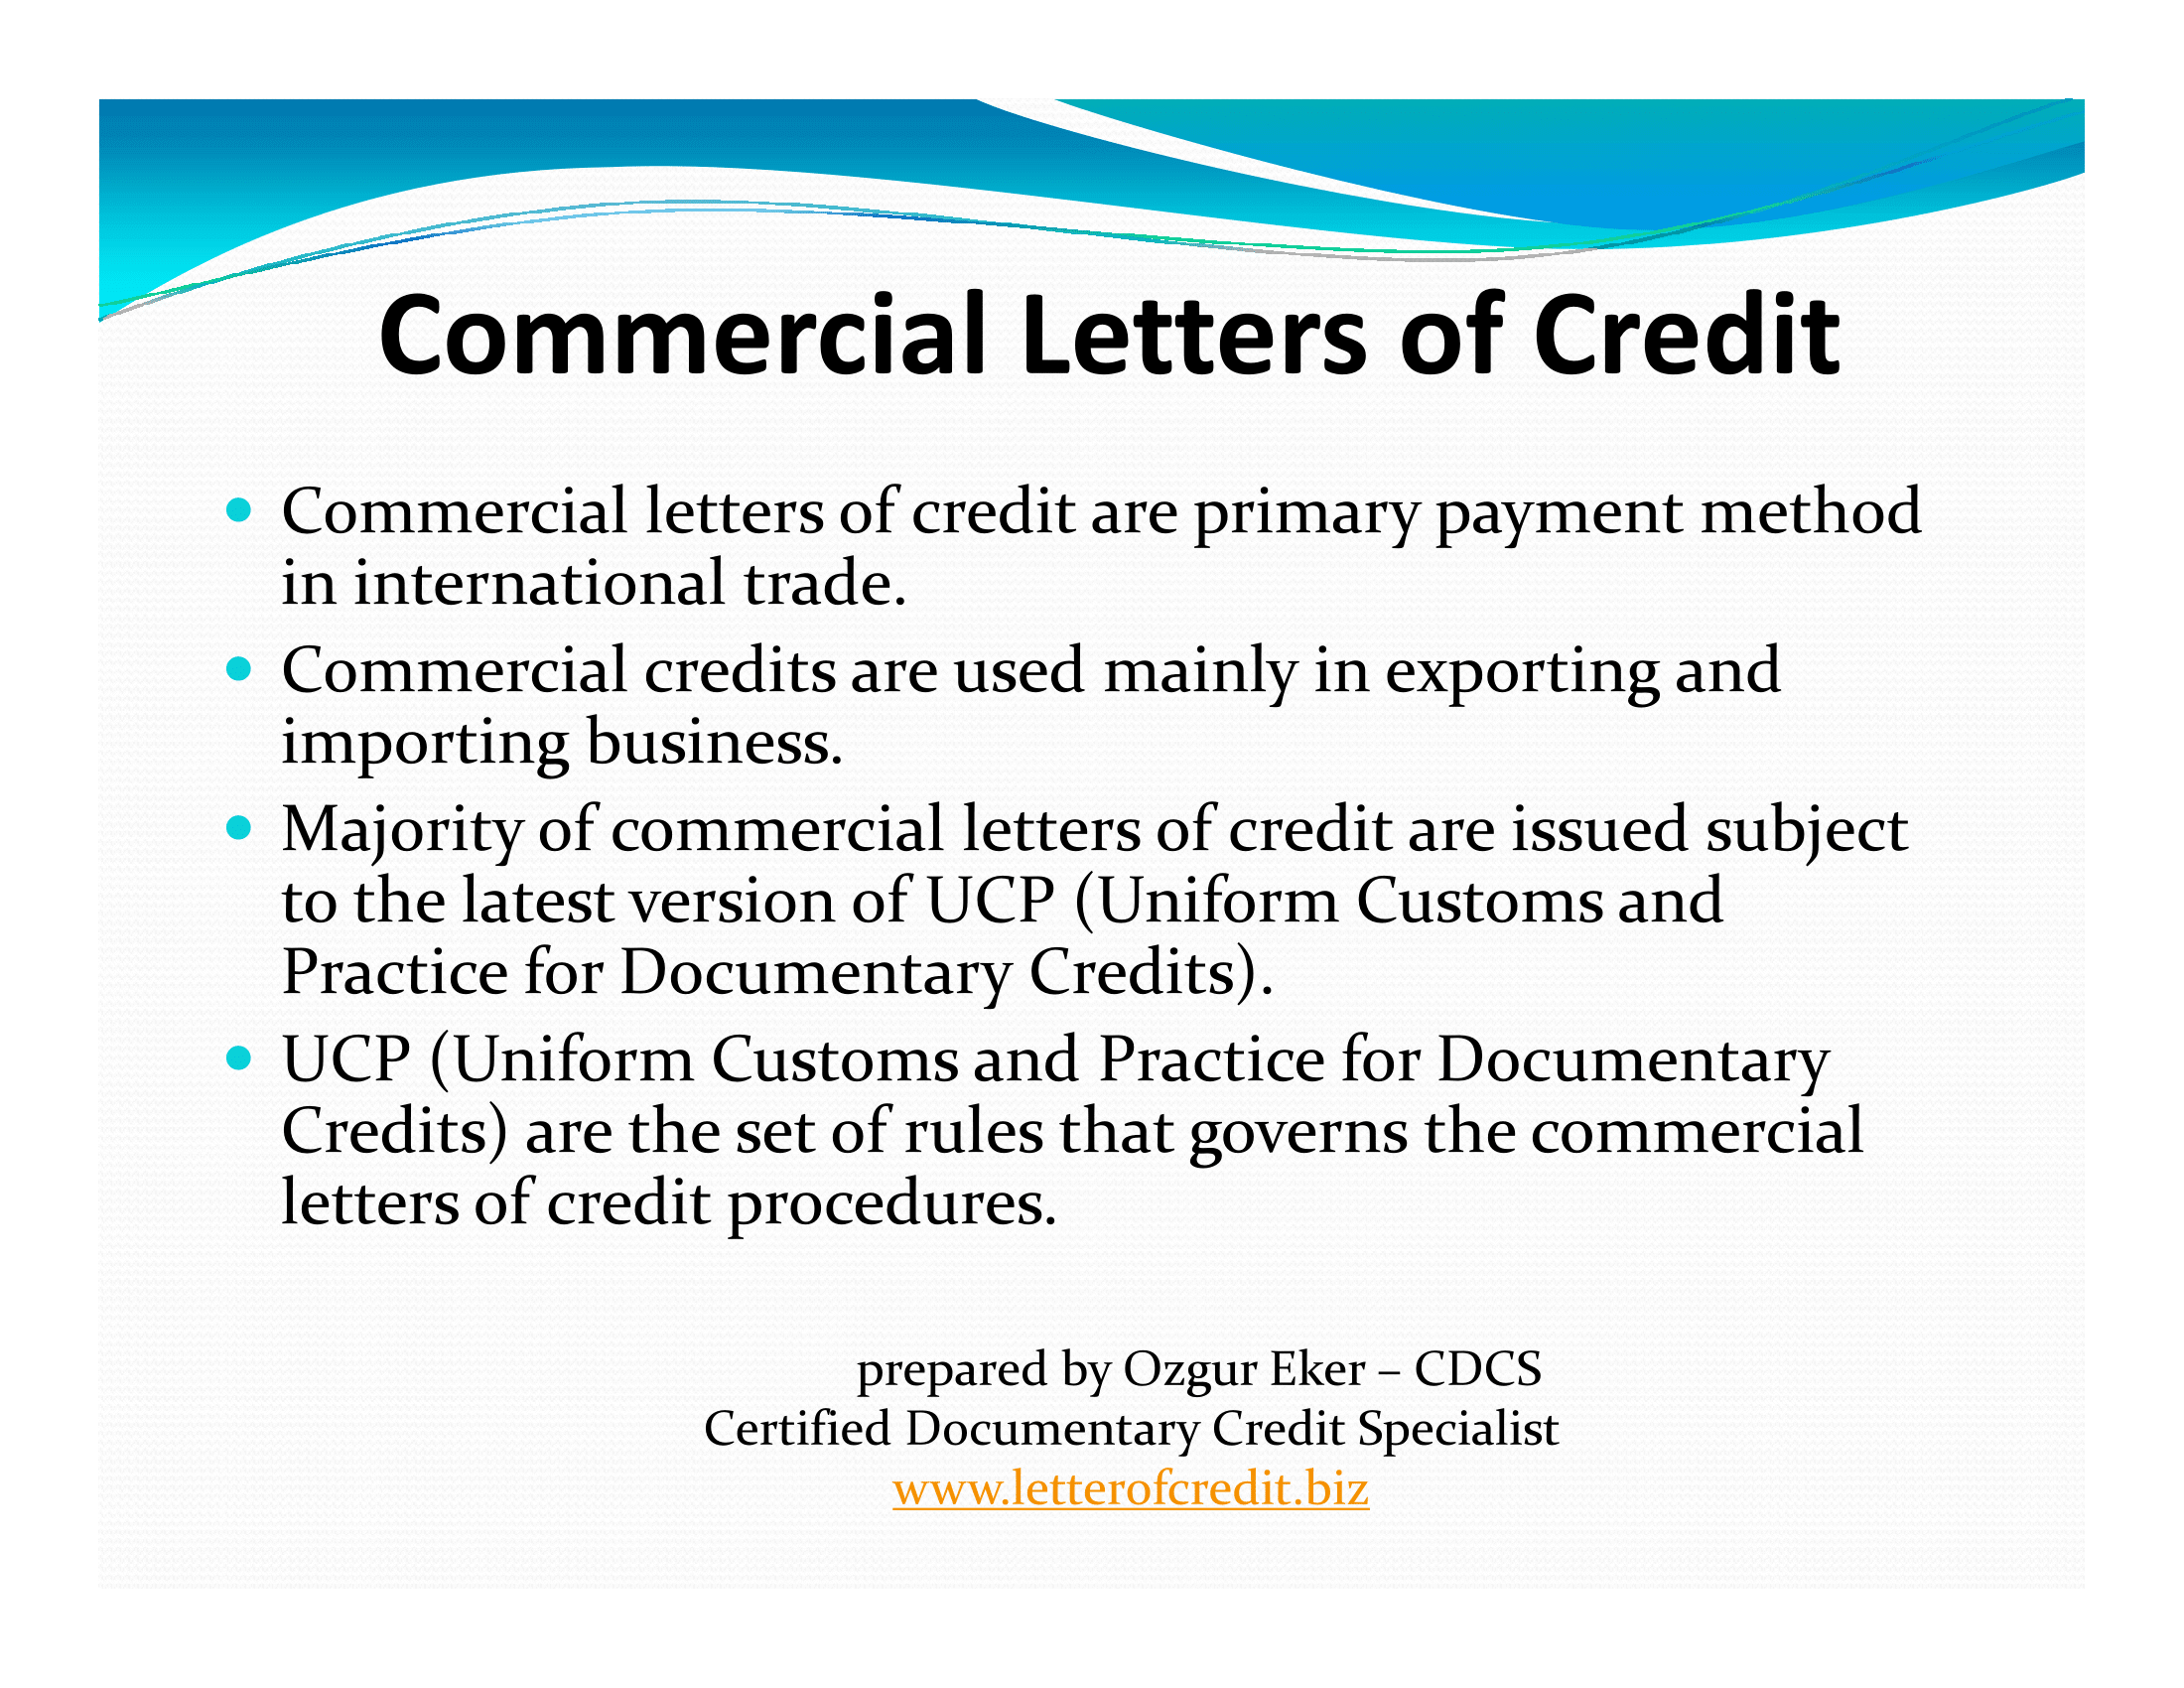 presentation of letters of credit